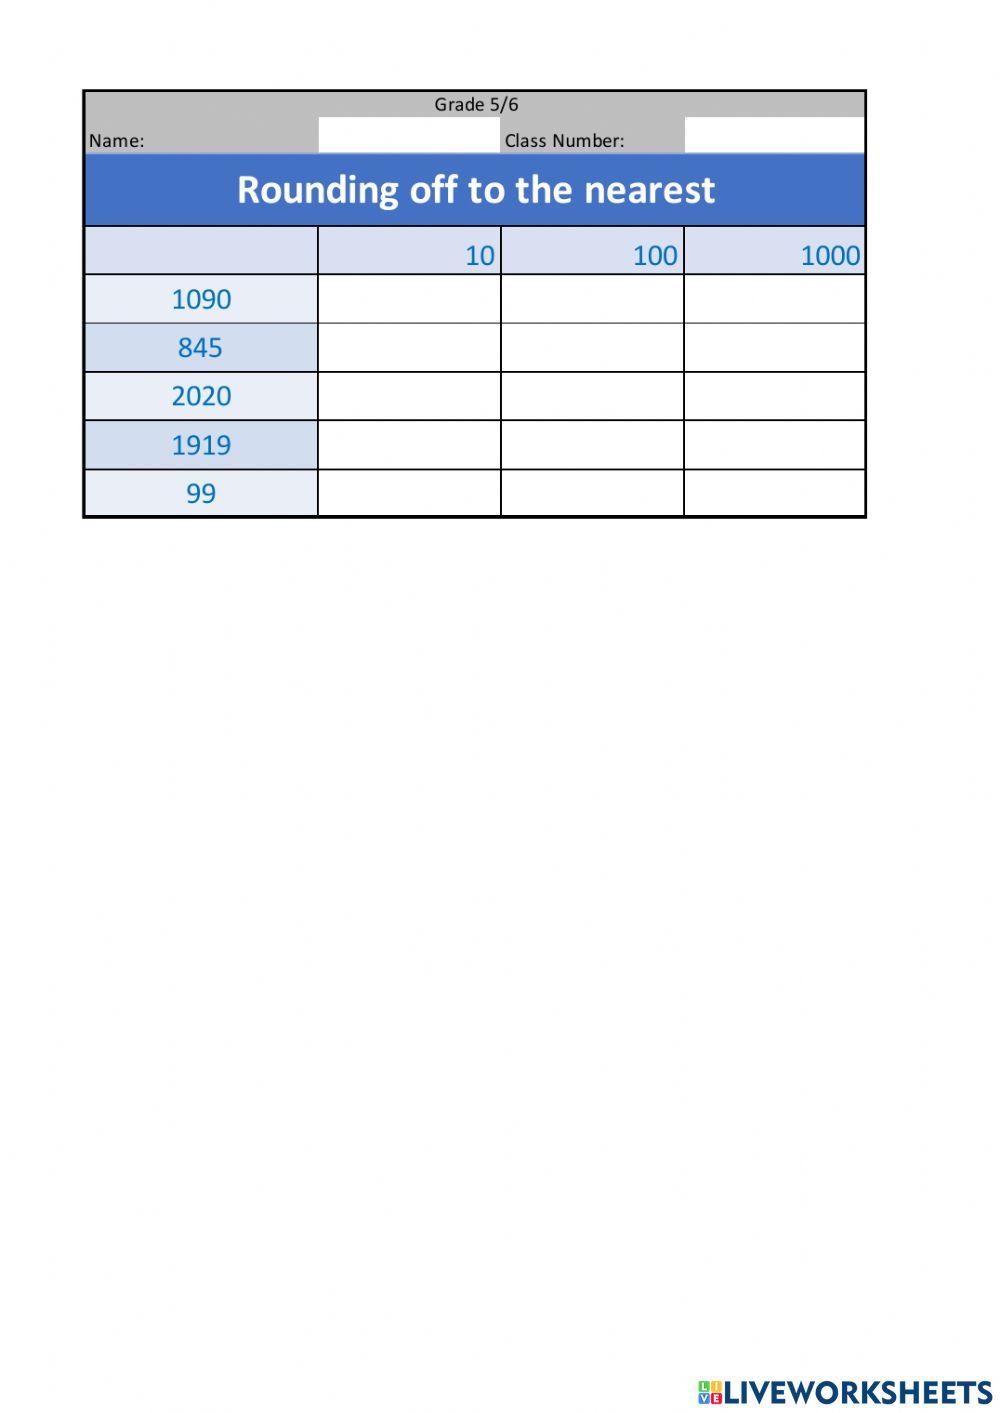 Grade 6 - Rounding off table